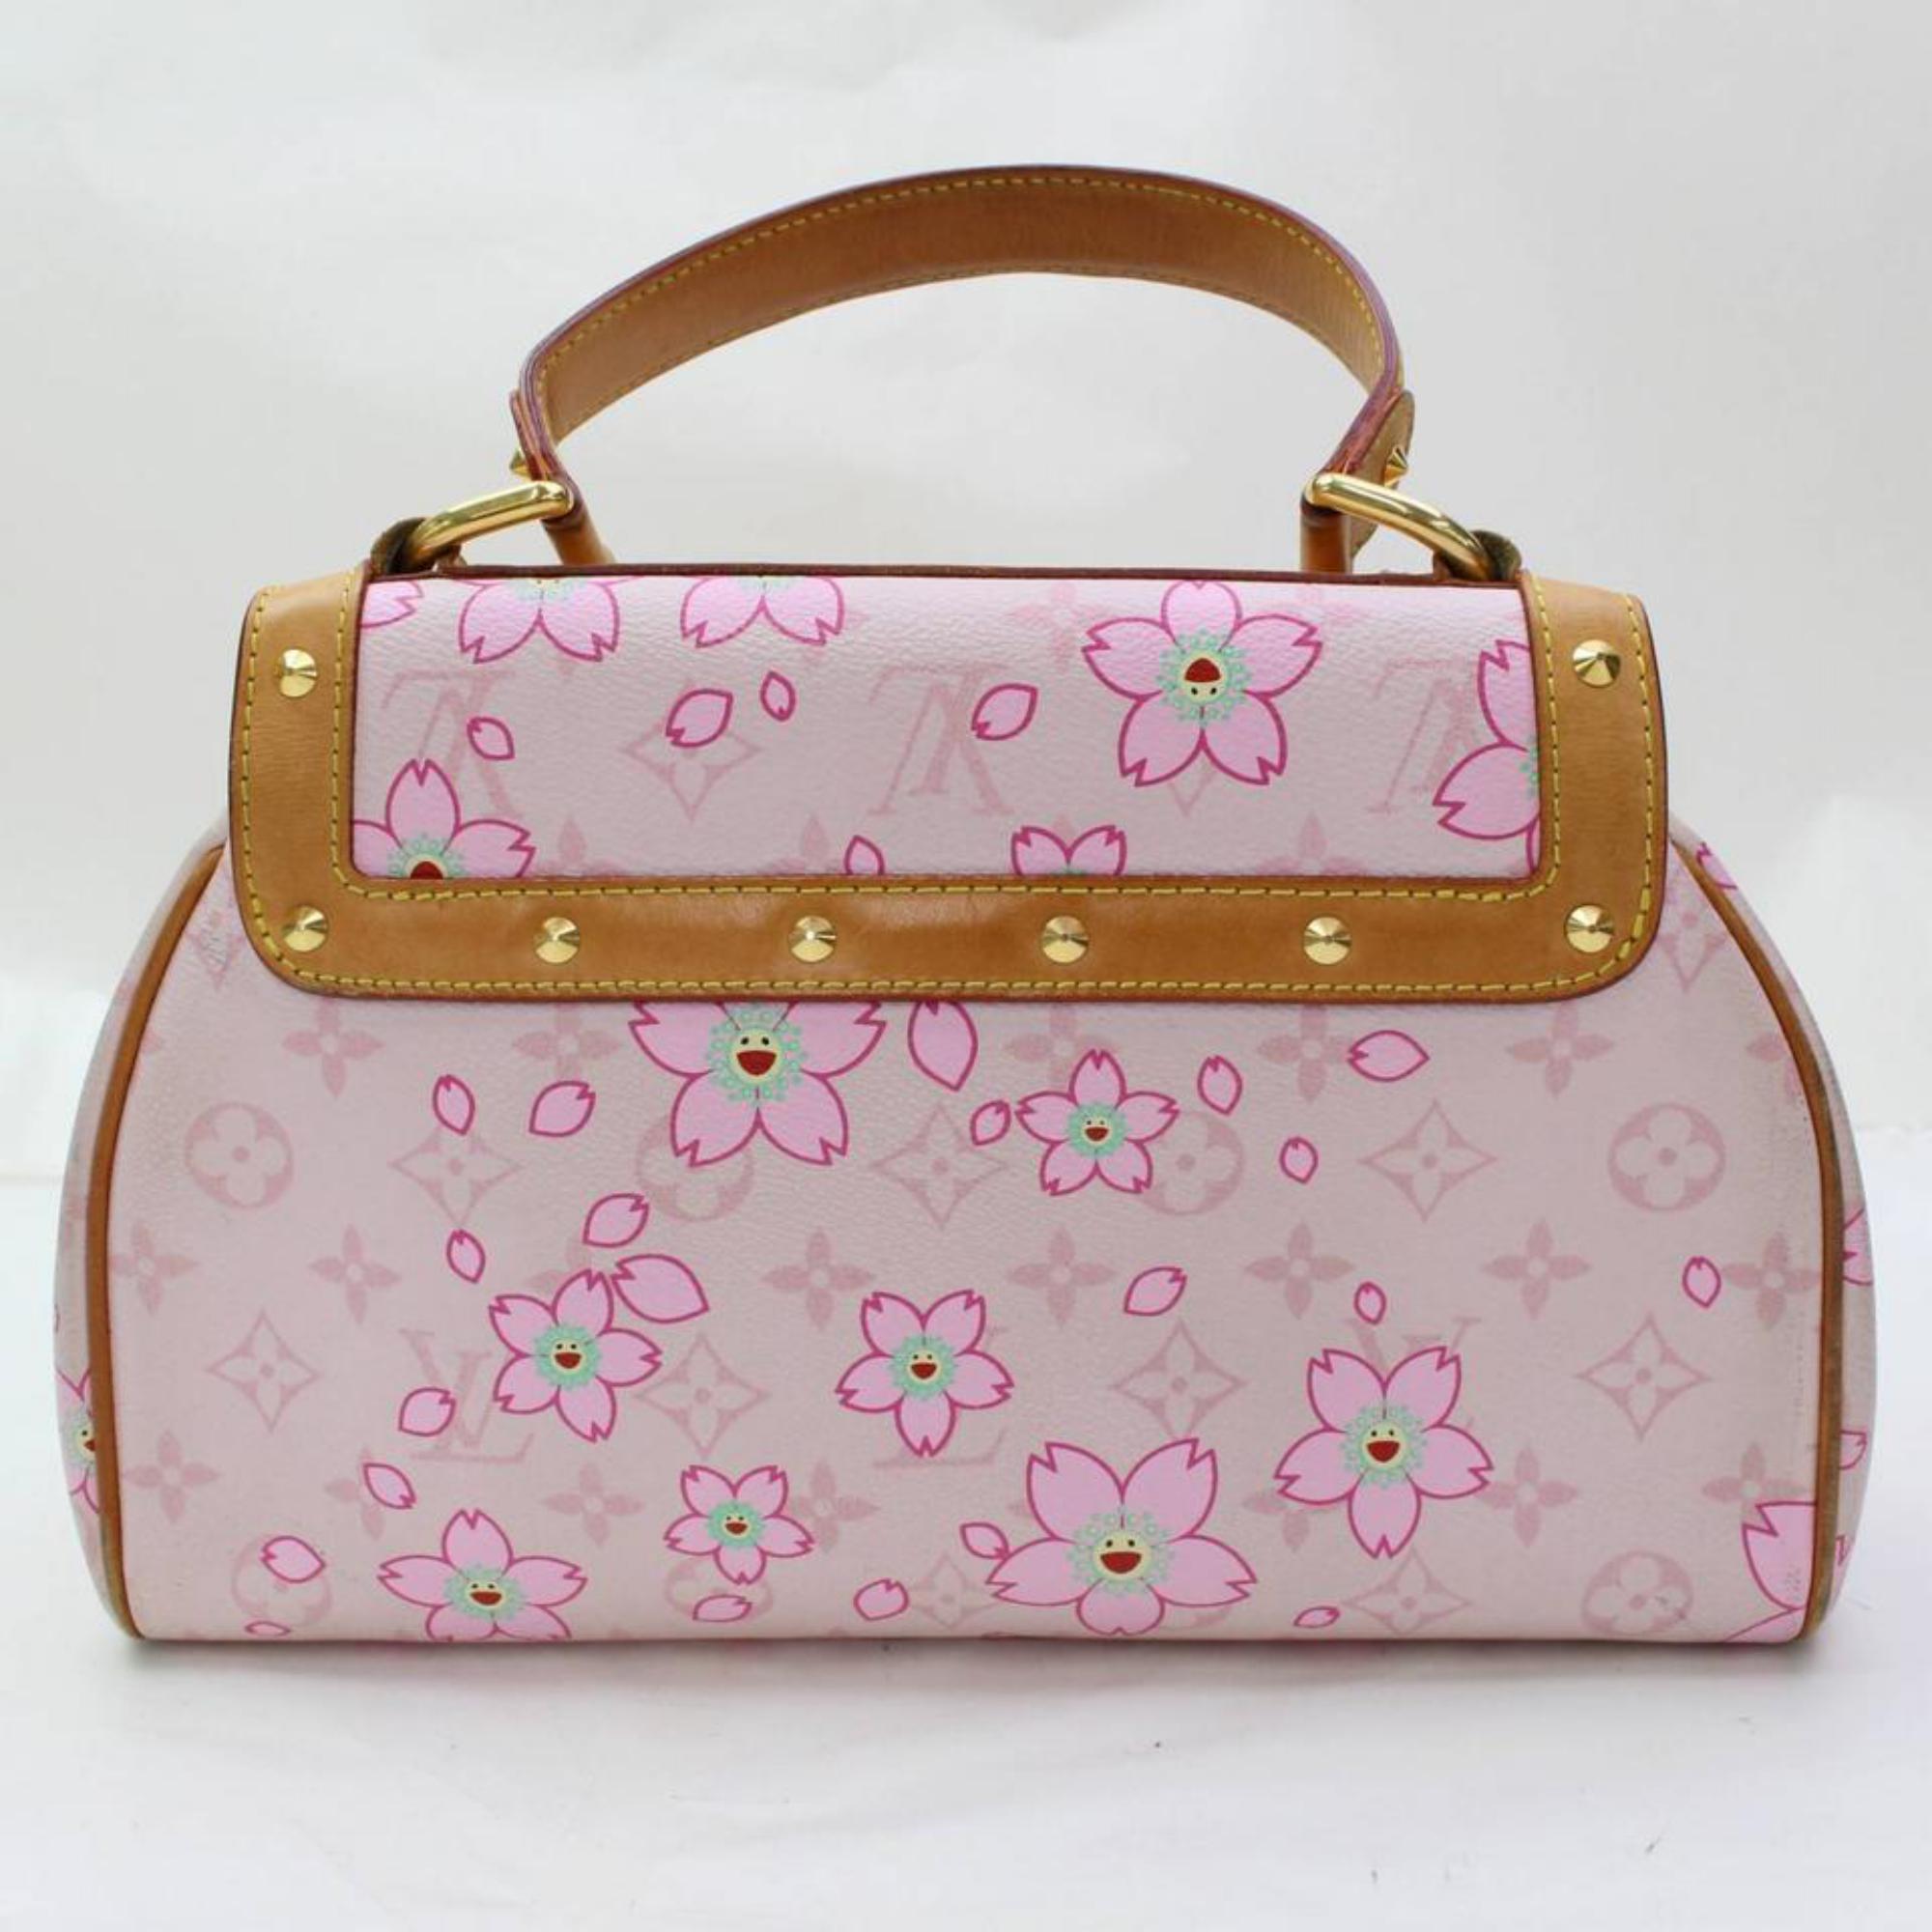 Brown Louis Vuitton Cherry Blossom Sac Retro 867220 Pink Coated Canvas satchel